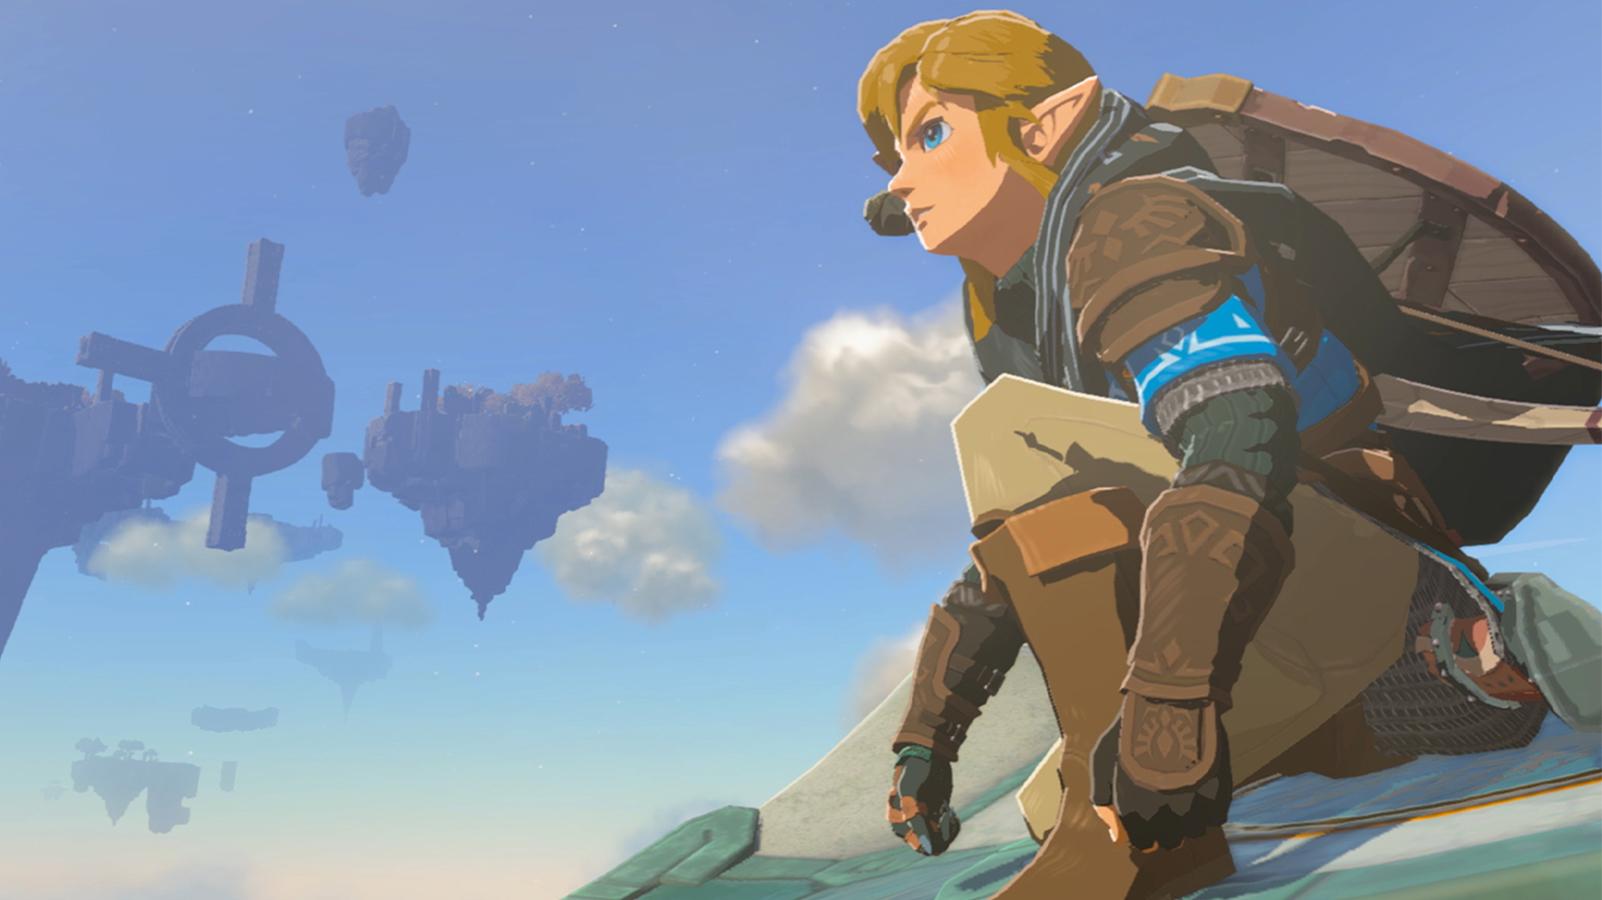 Entertainment News : Nintendo is officially making a live-action Legend of Zelda  movie